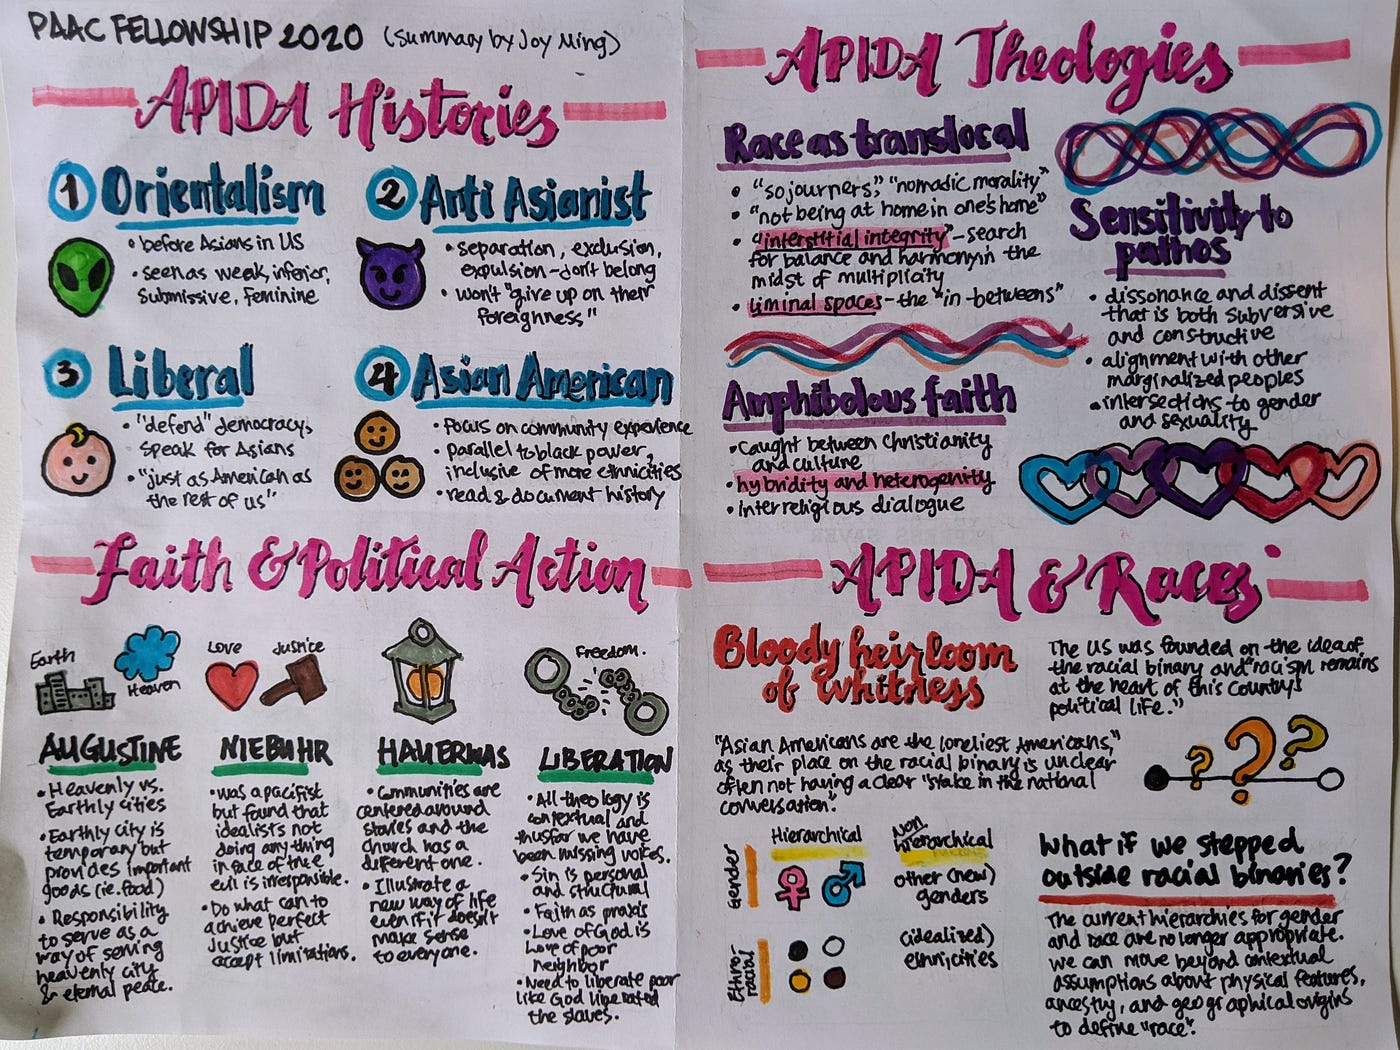 Visual summary of concepts presented by a fellowship for progressive, Asian American, Christians. Please refer to the linked blogpost for a full transcription of the text in the image.